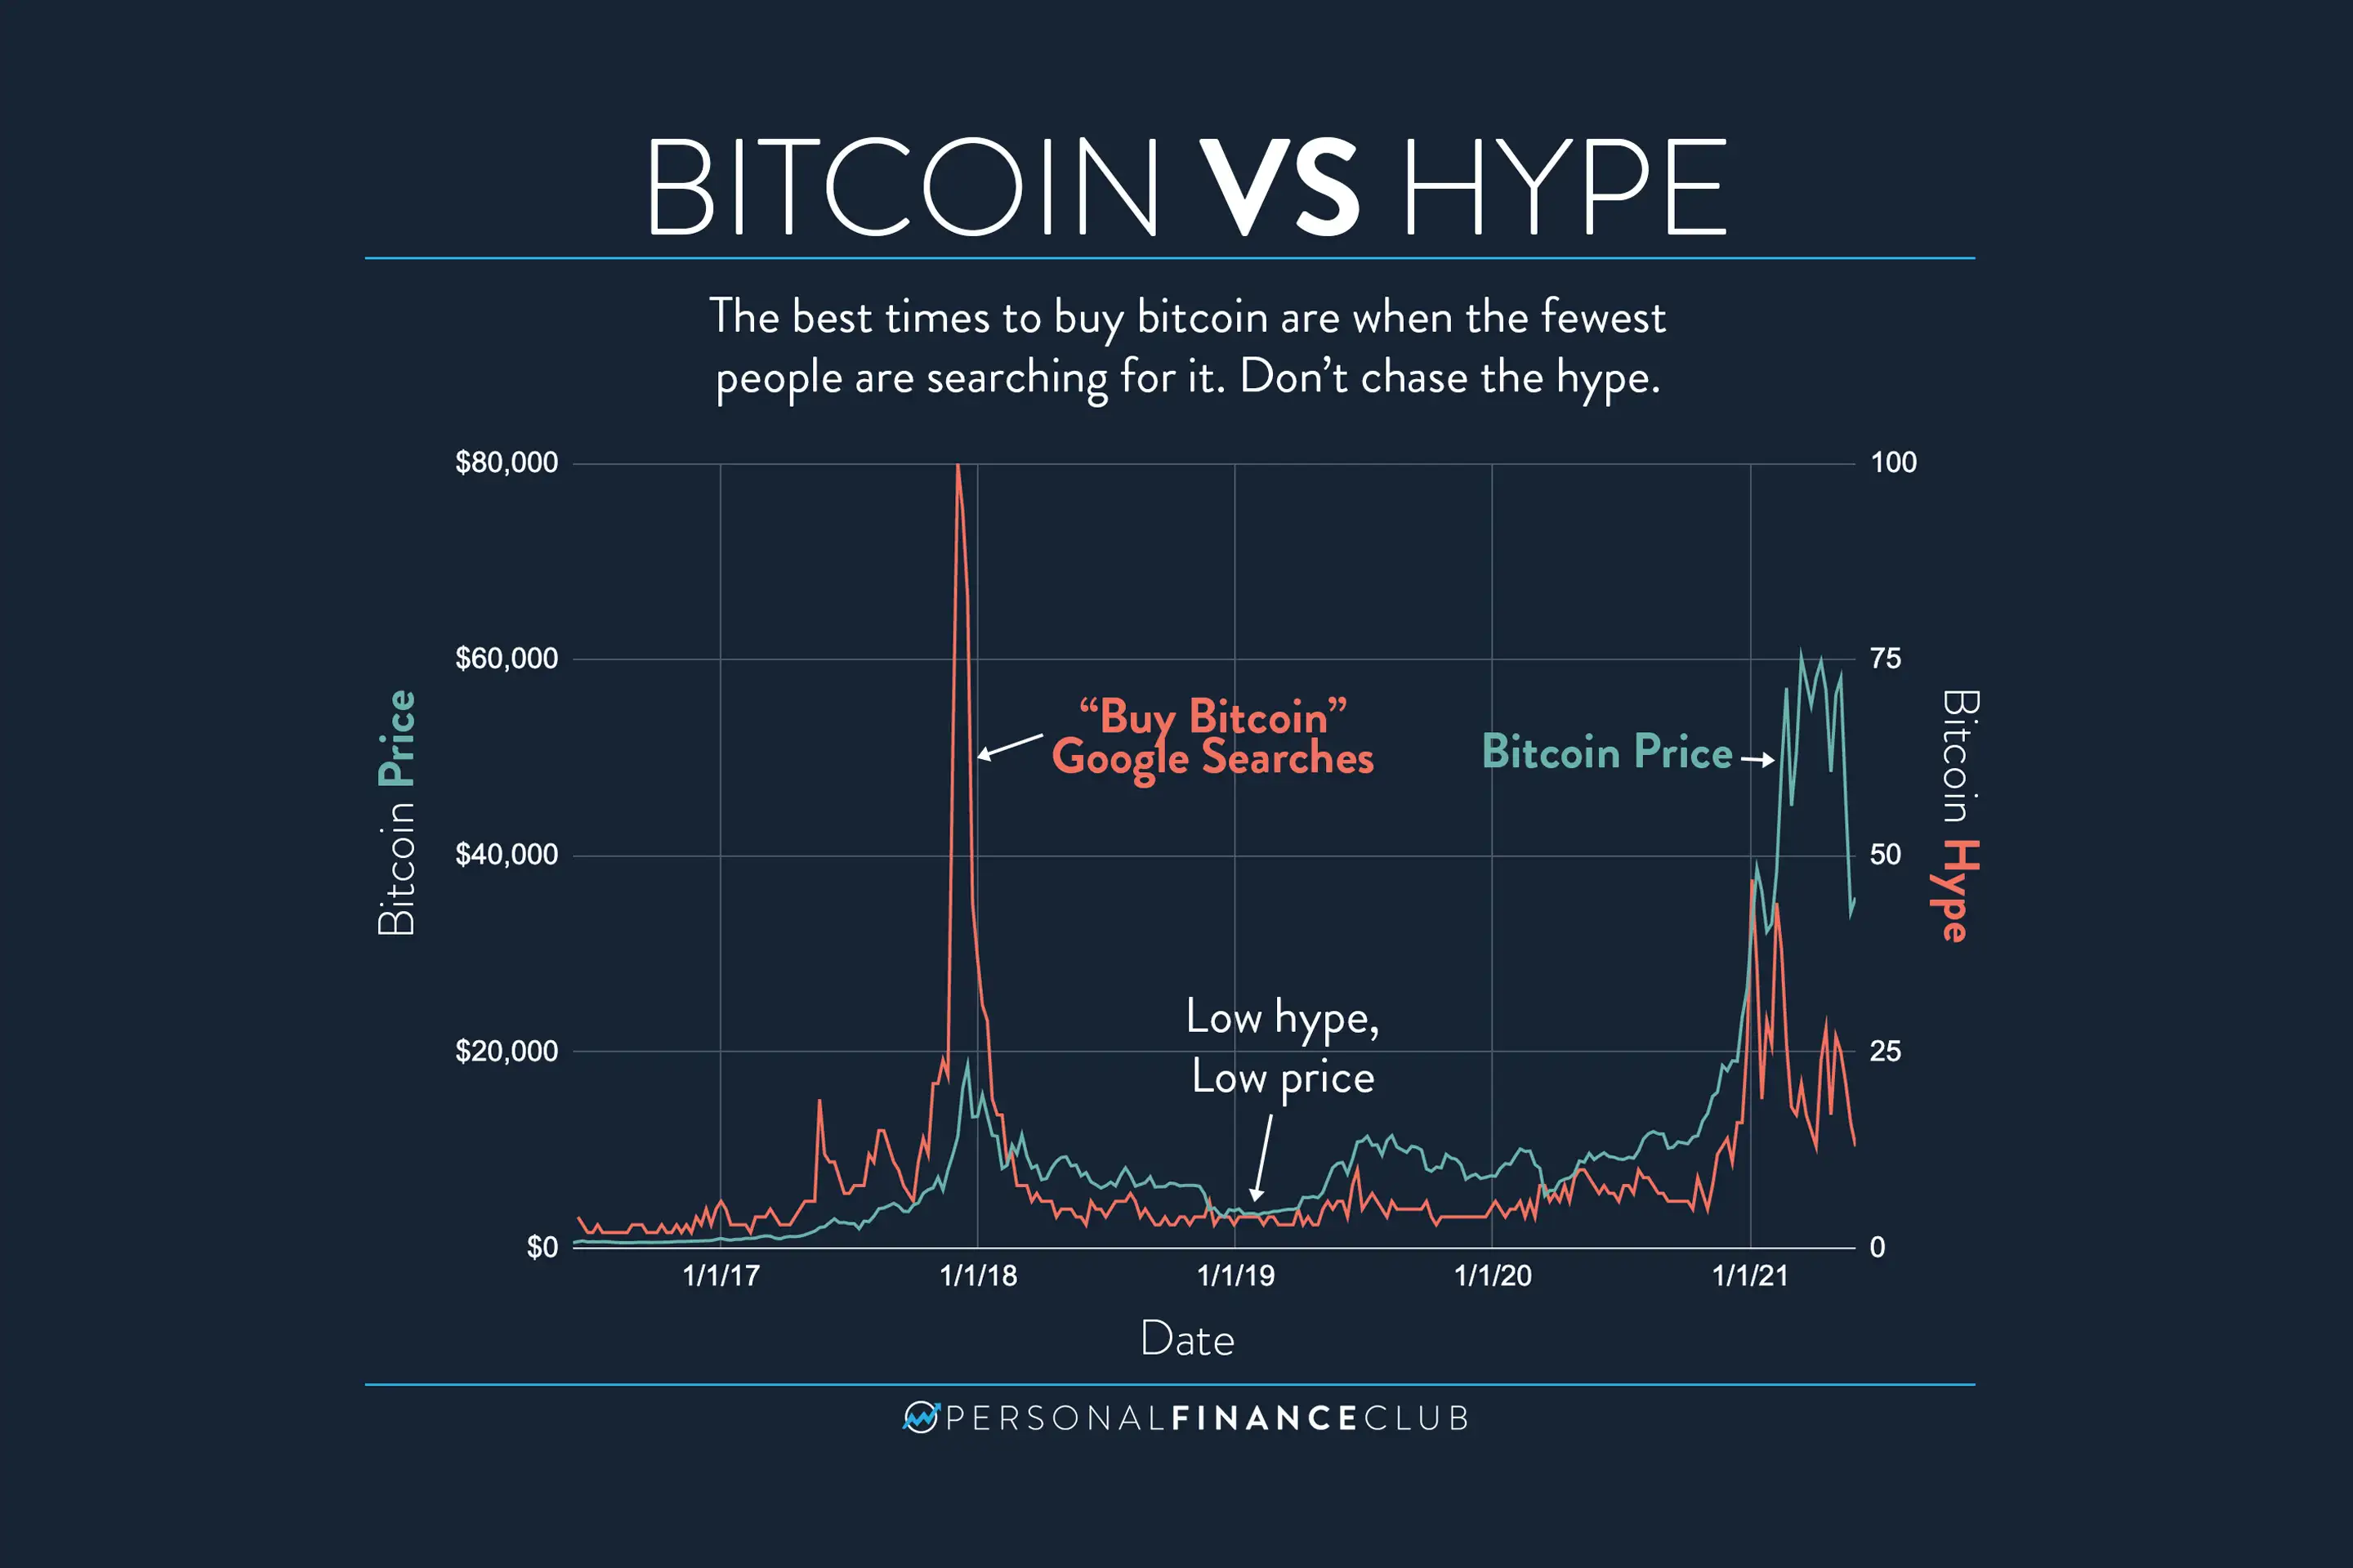 Bitcoin vs Hype chart that shows best times to buy bitcoin are when the fewest people are searching for it.